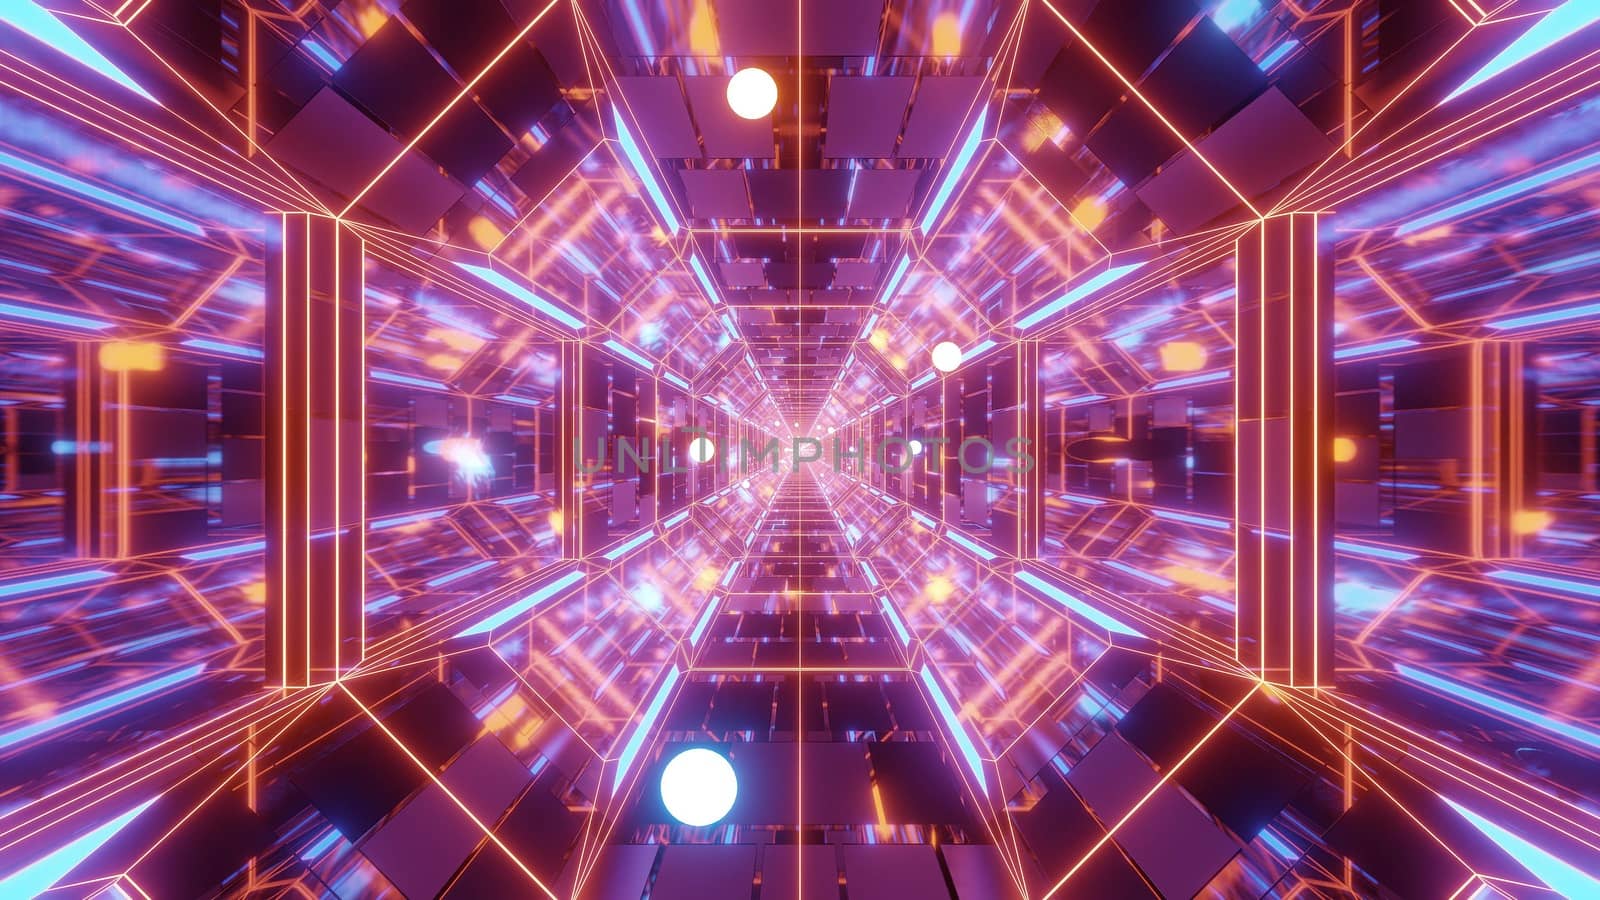 endlless science-fiction space galaxy glass tunnel corridor with flying glowing sphere particles 3d illustration wallpaper background by tunnelmotions